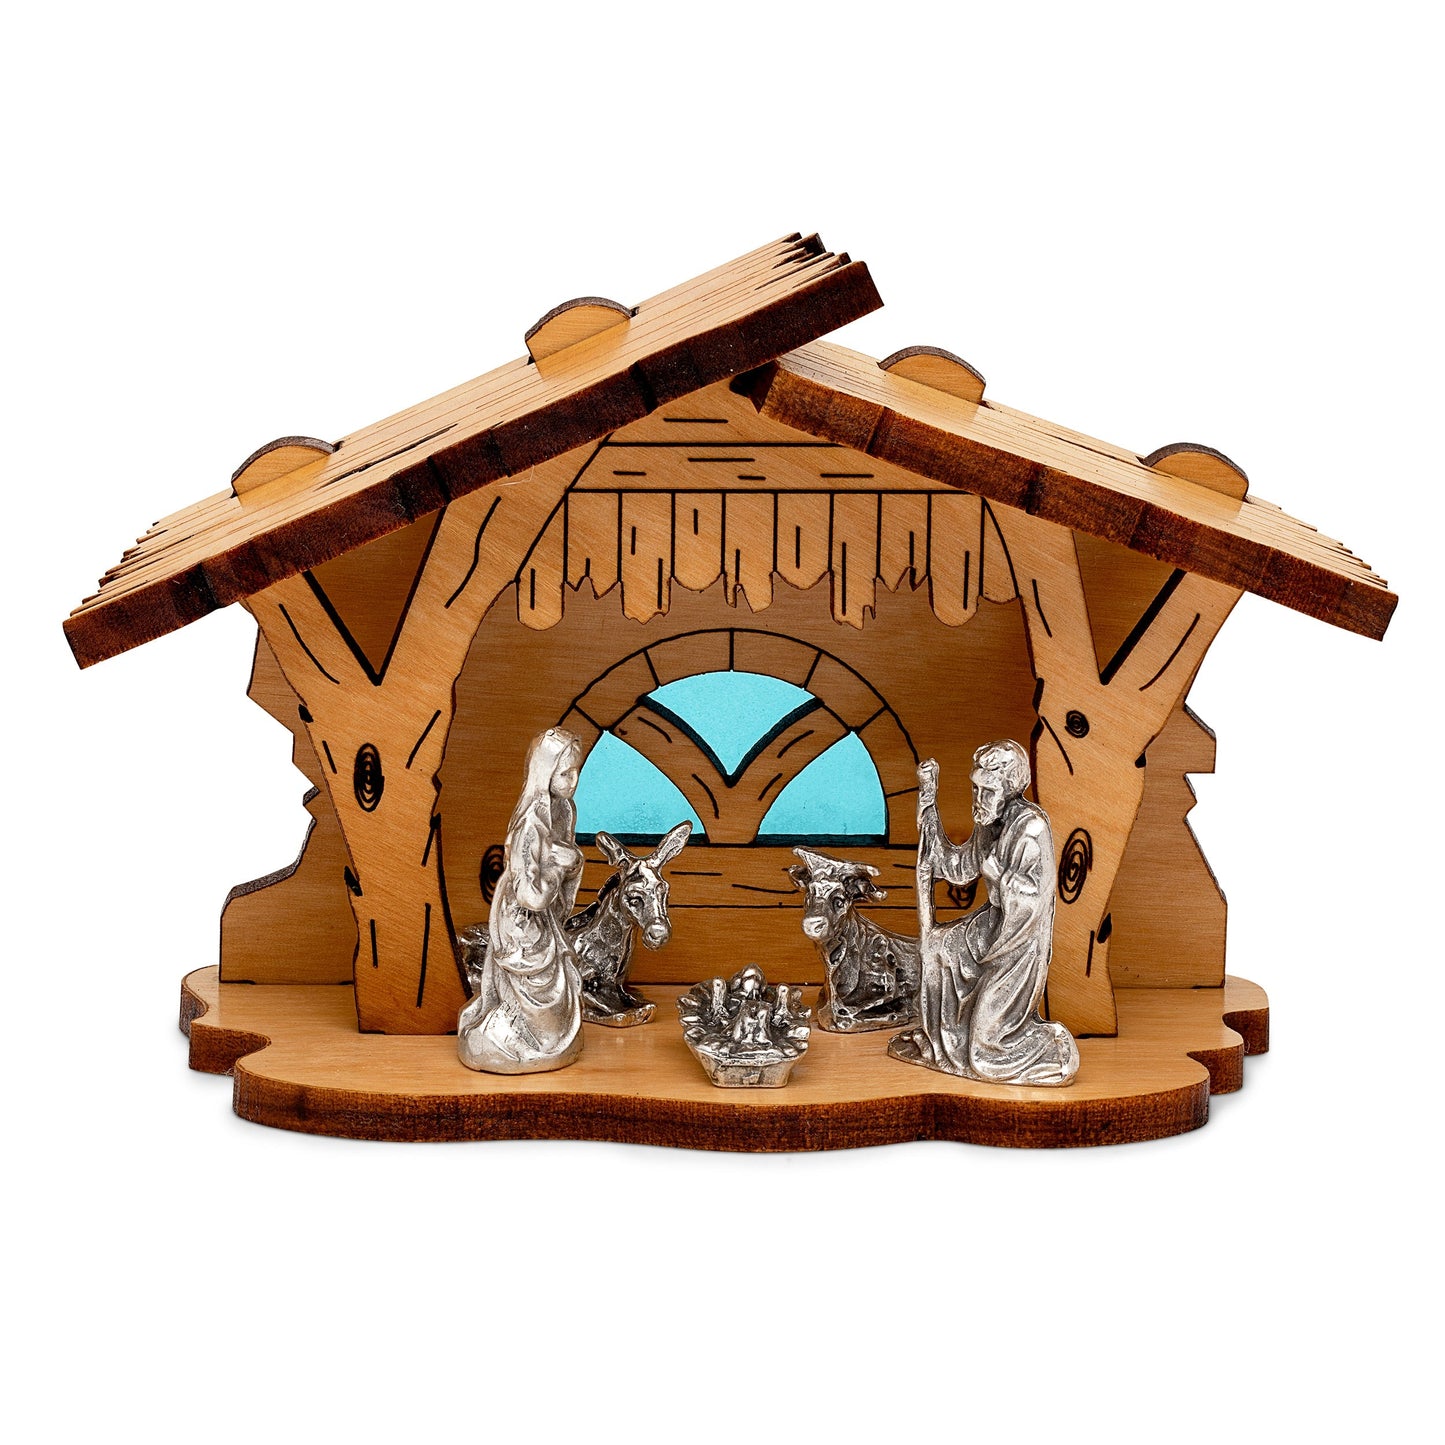 Mondo Cattolico 7 cm (2.76 in) Nativity Scene With Wooden Hut and Light Blue Background